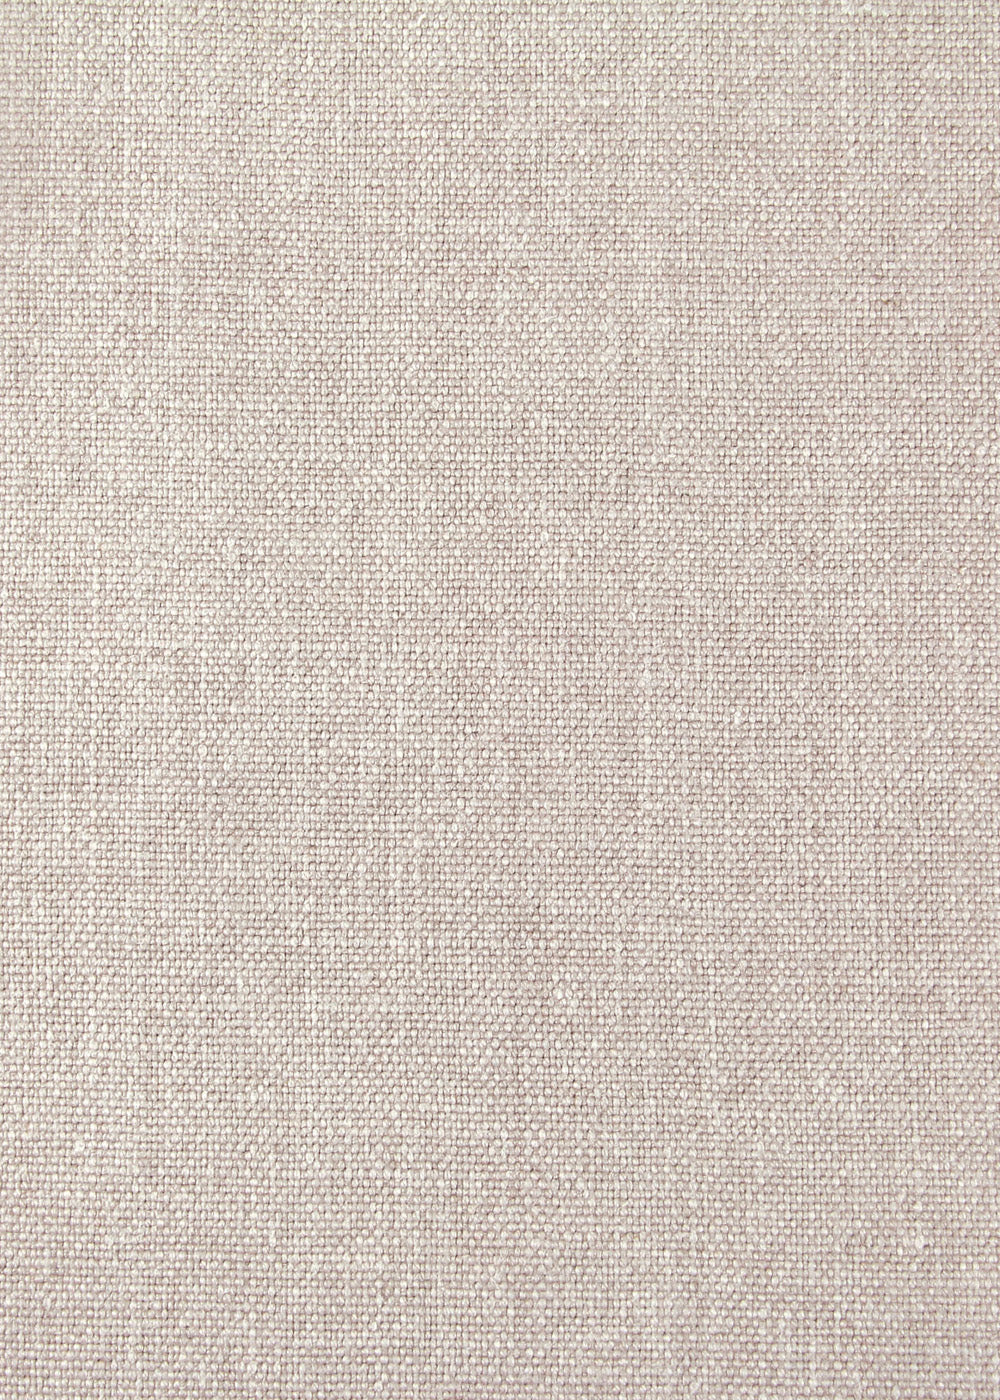 linen fabric in a light oatmeal color